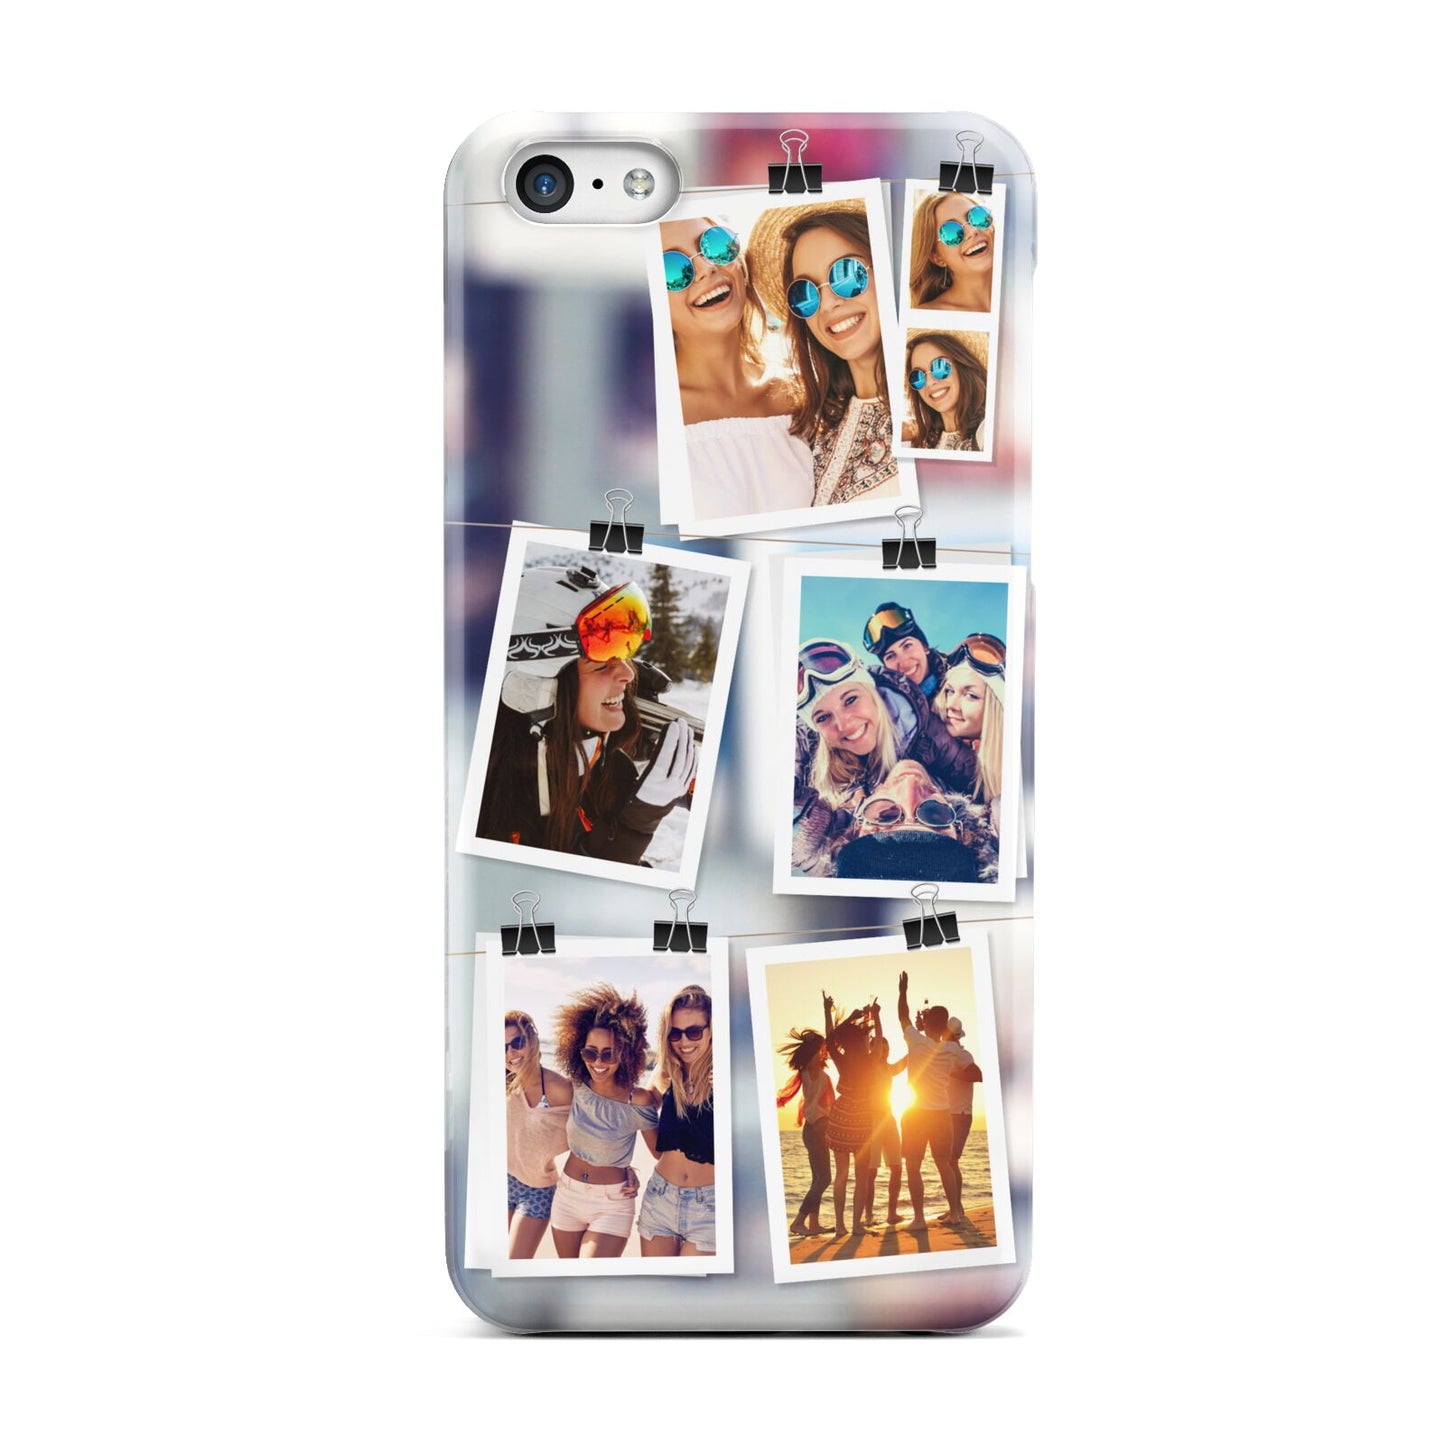 Photo Wall Montage Upload Apple iPhone 5c Case